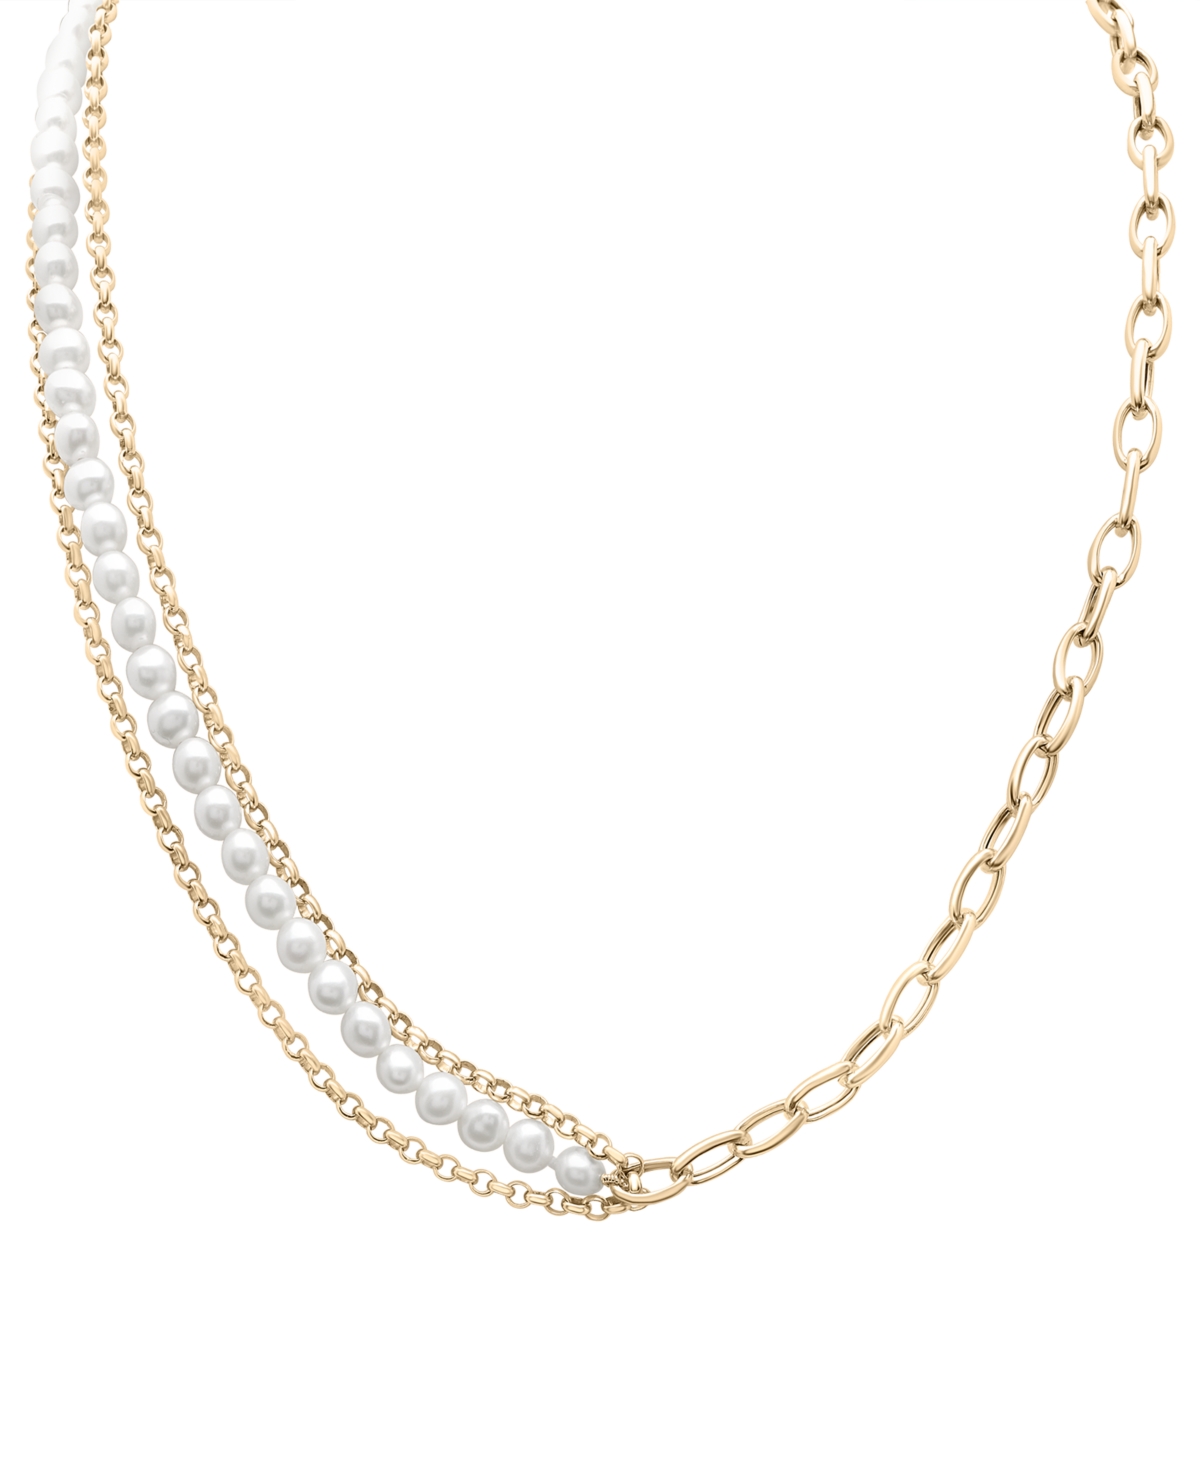 Cultured Freshwater Pearl (5mm) Multi-Layer Statement Necklace in Gold Vermeil, Created for Macy's - Gold Vermeil